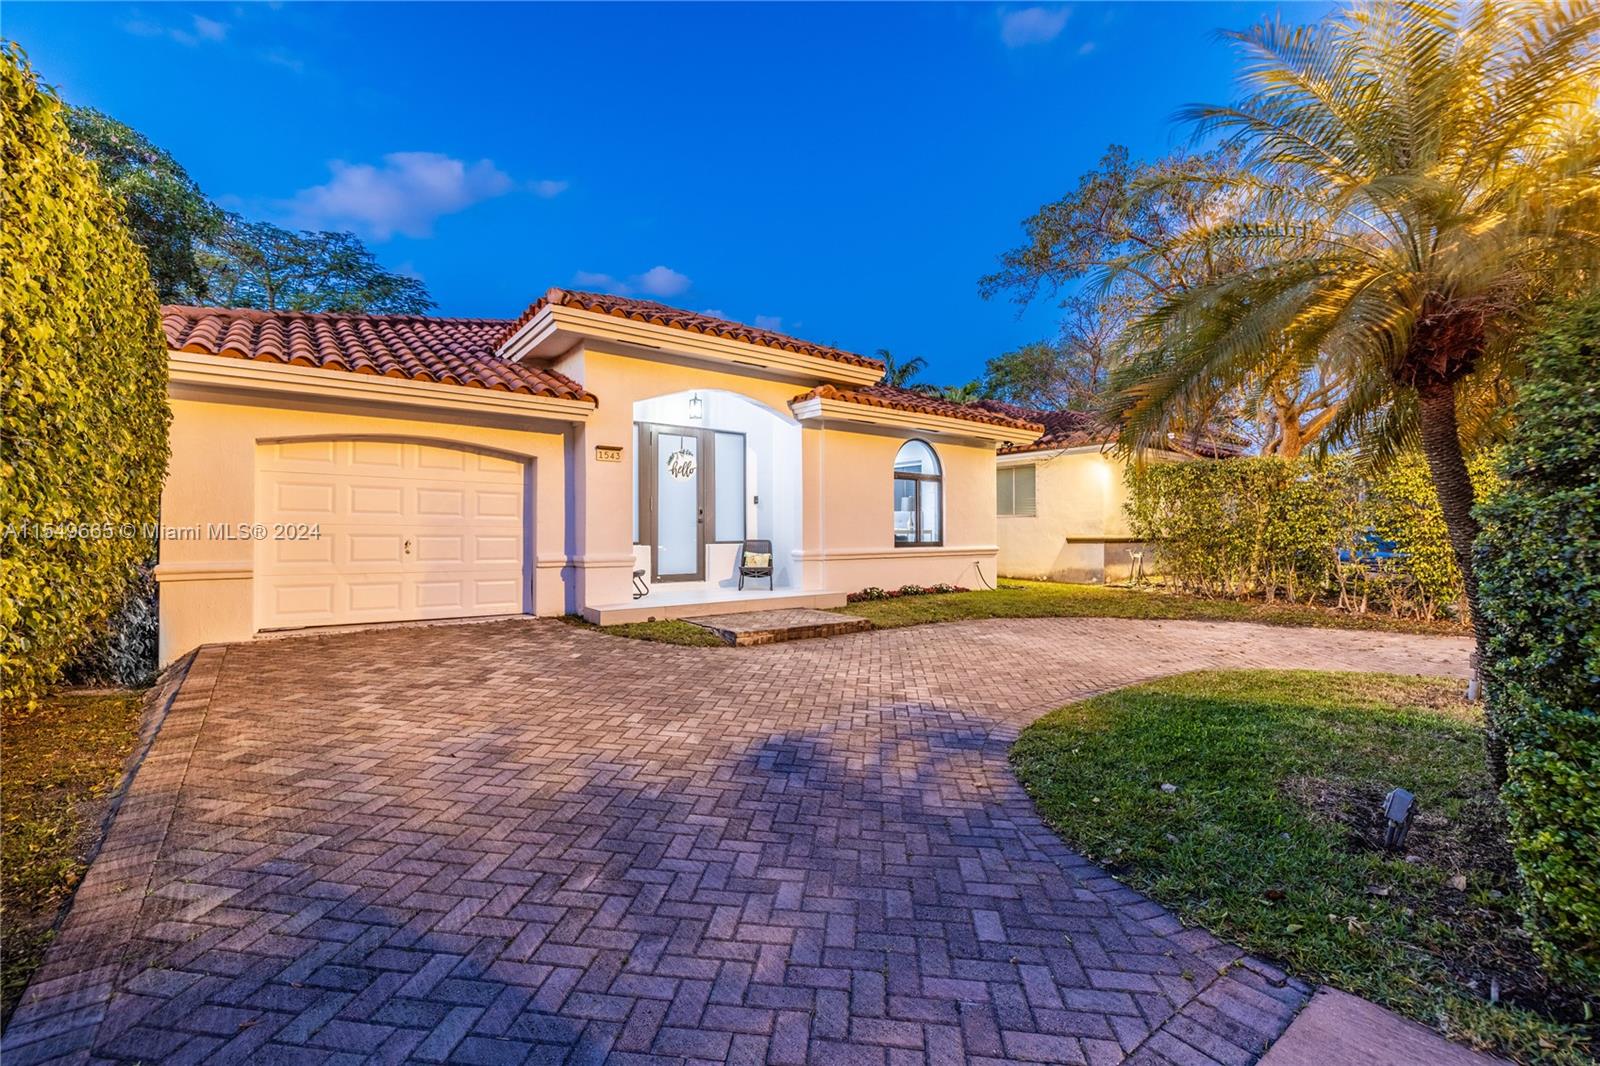 Property for Sale at 1543 Bird Rd, Coral Gables, Broward County, Florida - Bedrooms: 4 
Bathrooms: 3  - $1,300,000